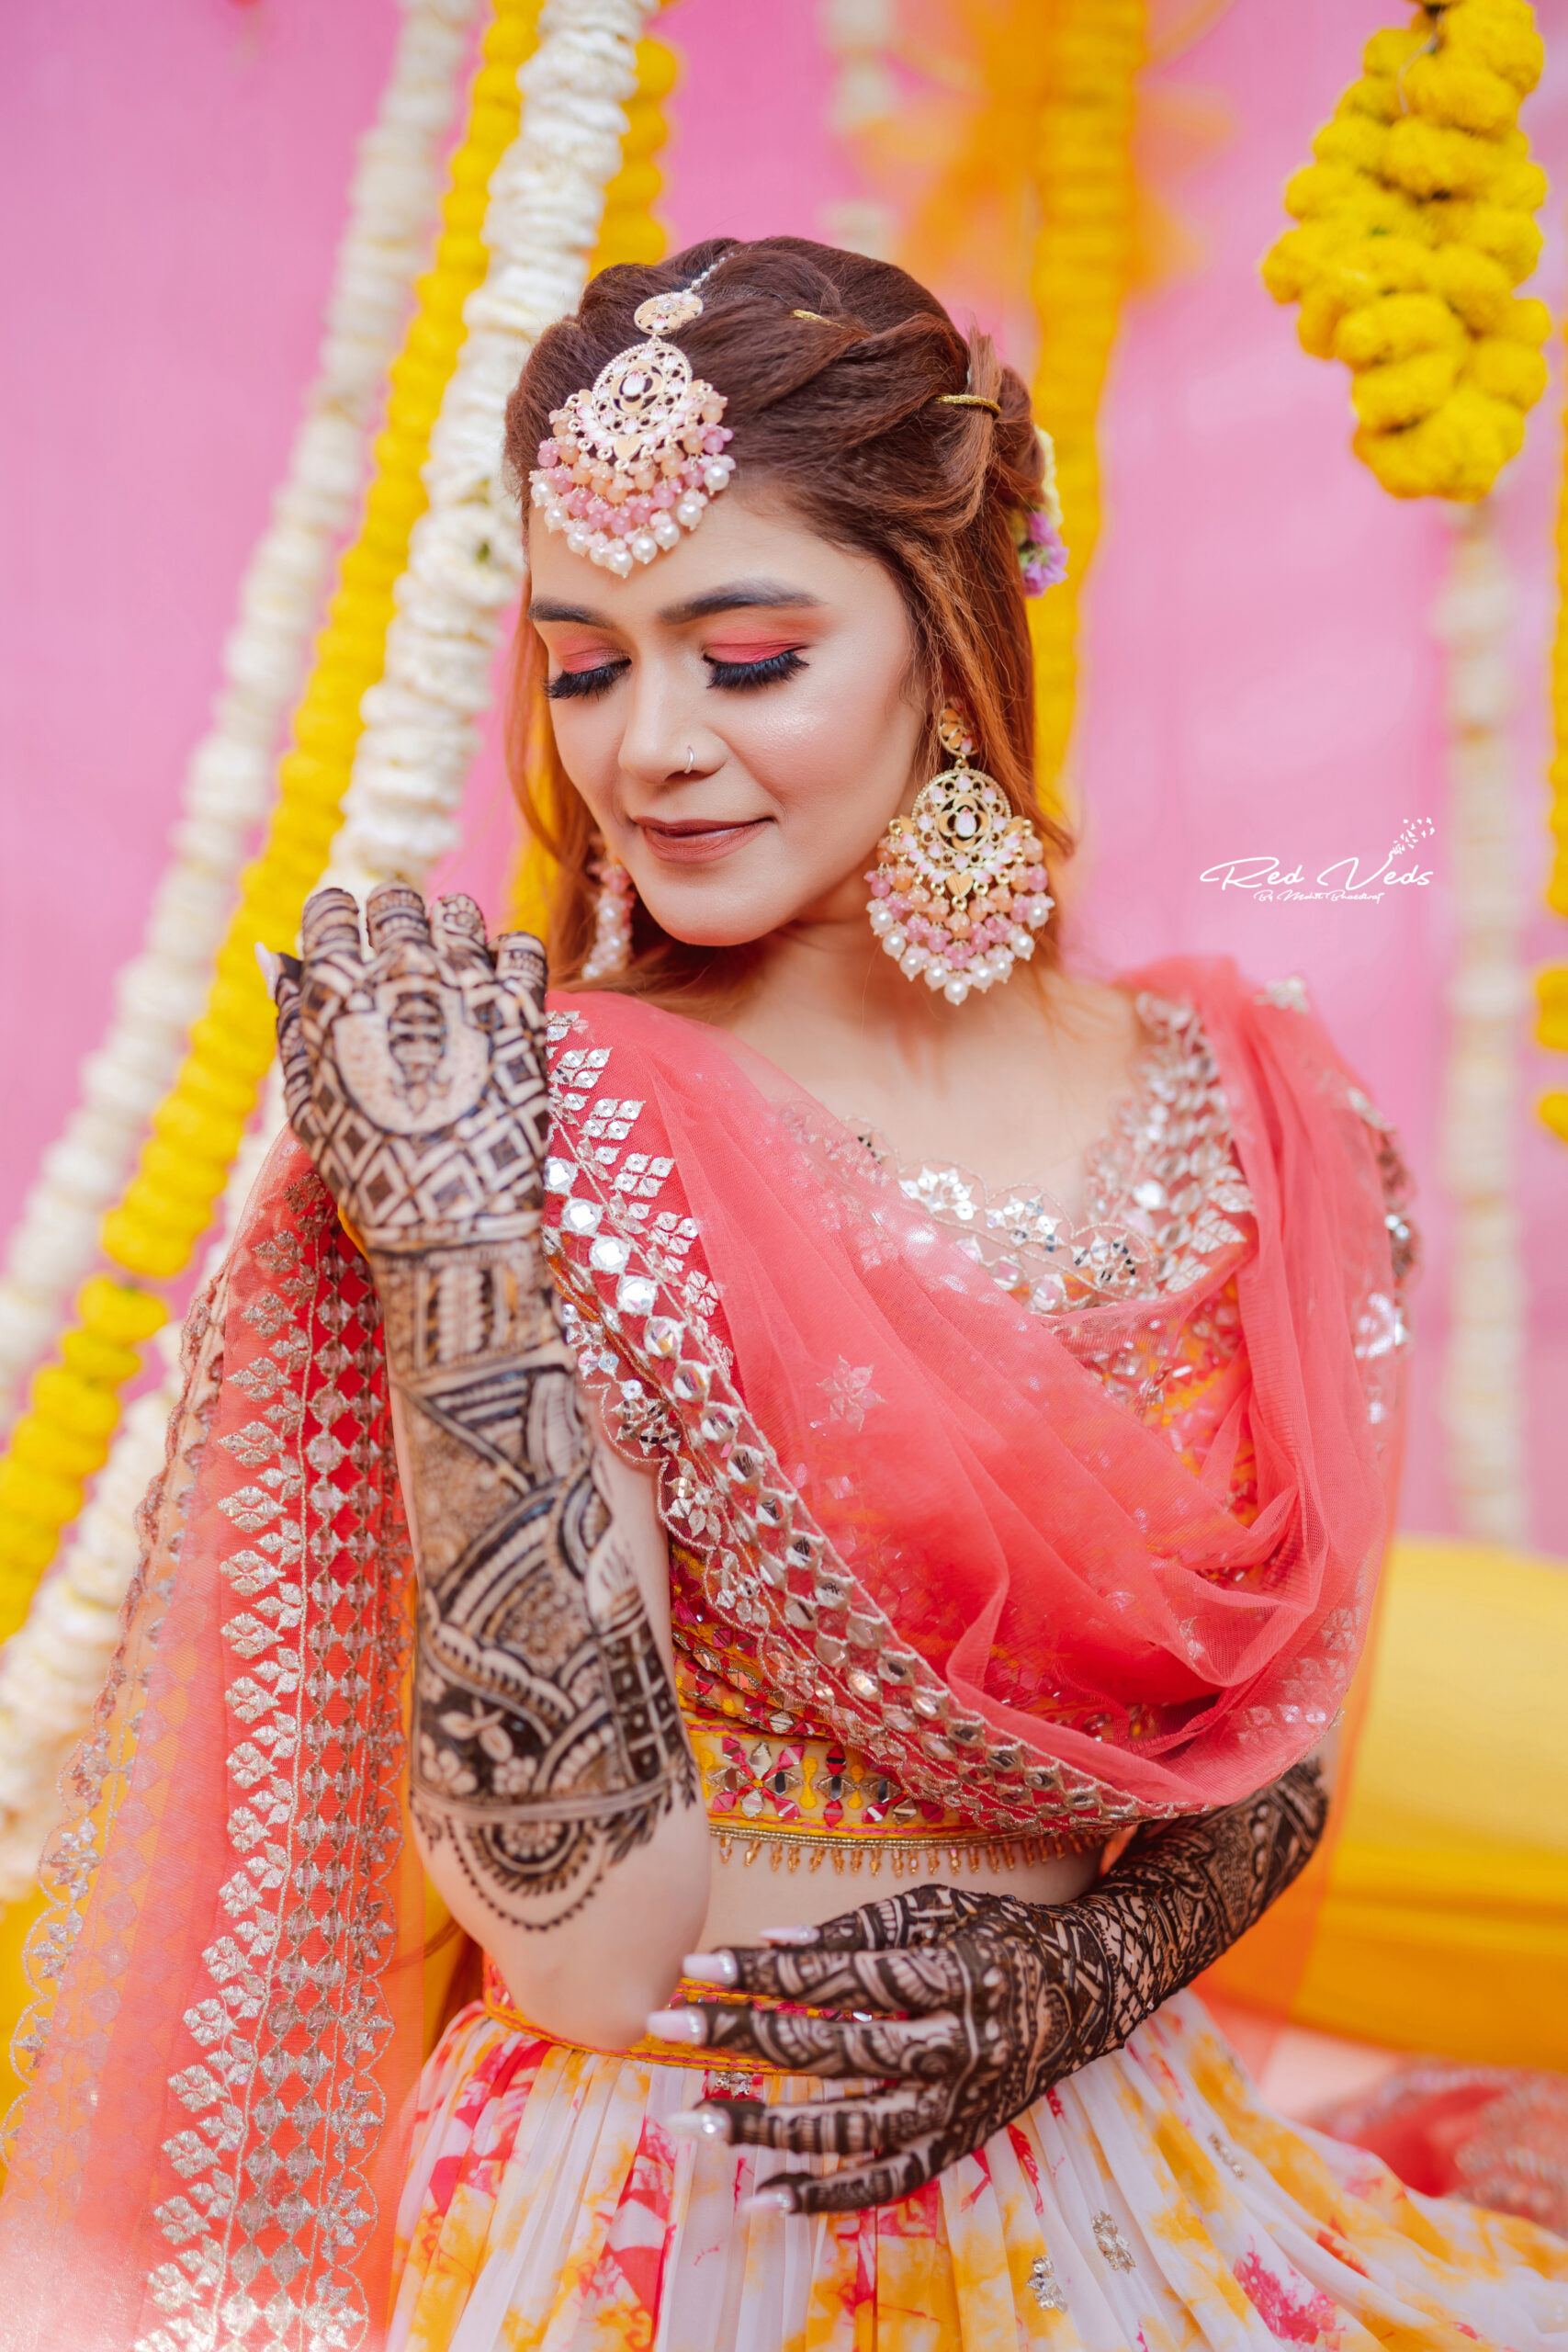 SHUBHAM MEHNDI WALA(OLD FAMOUS GOLD MEDALIST) in Bhoothnath Market,Lucknow  - Best Bridal Mehendi Artists in Lucknow - Justdial